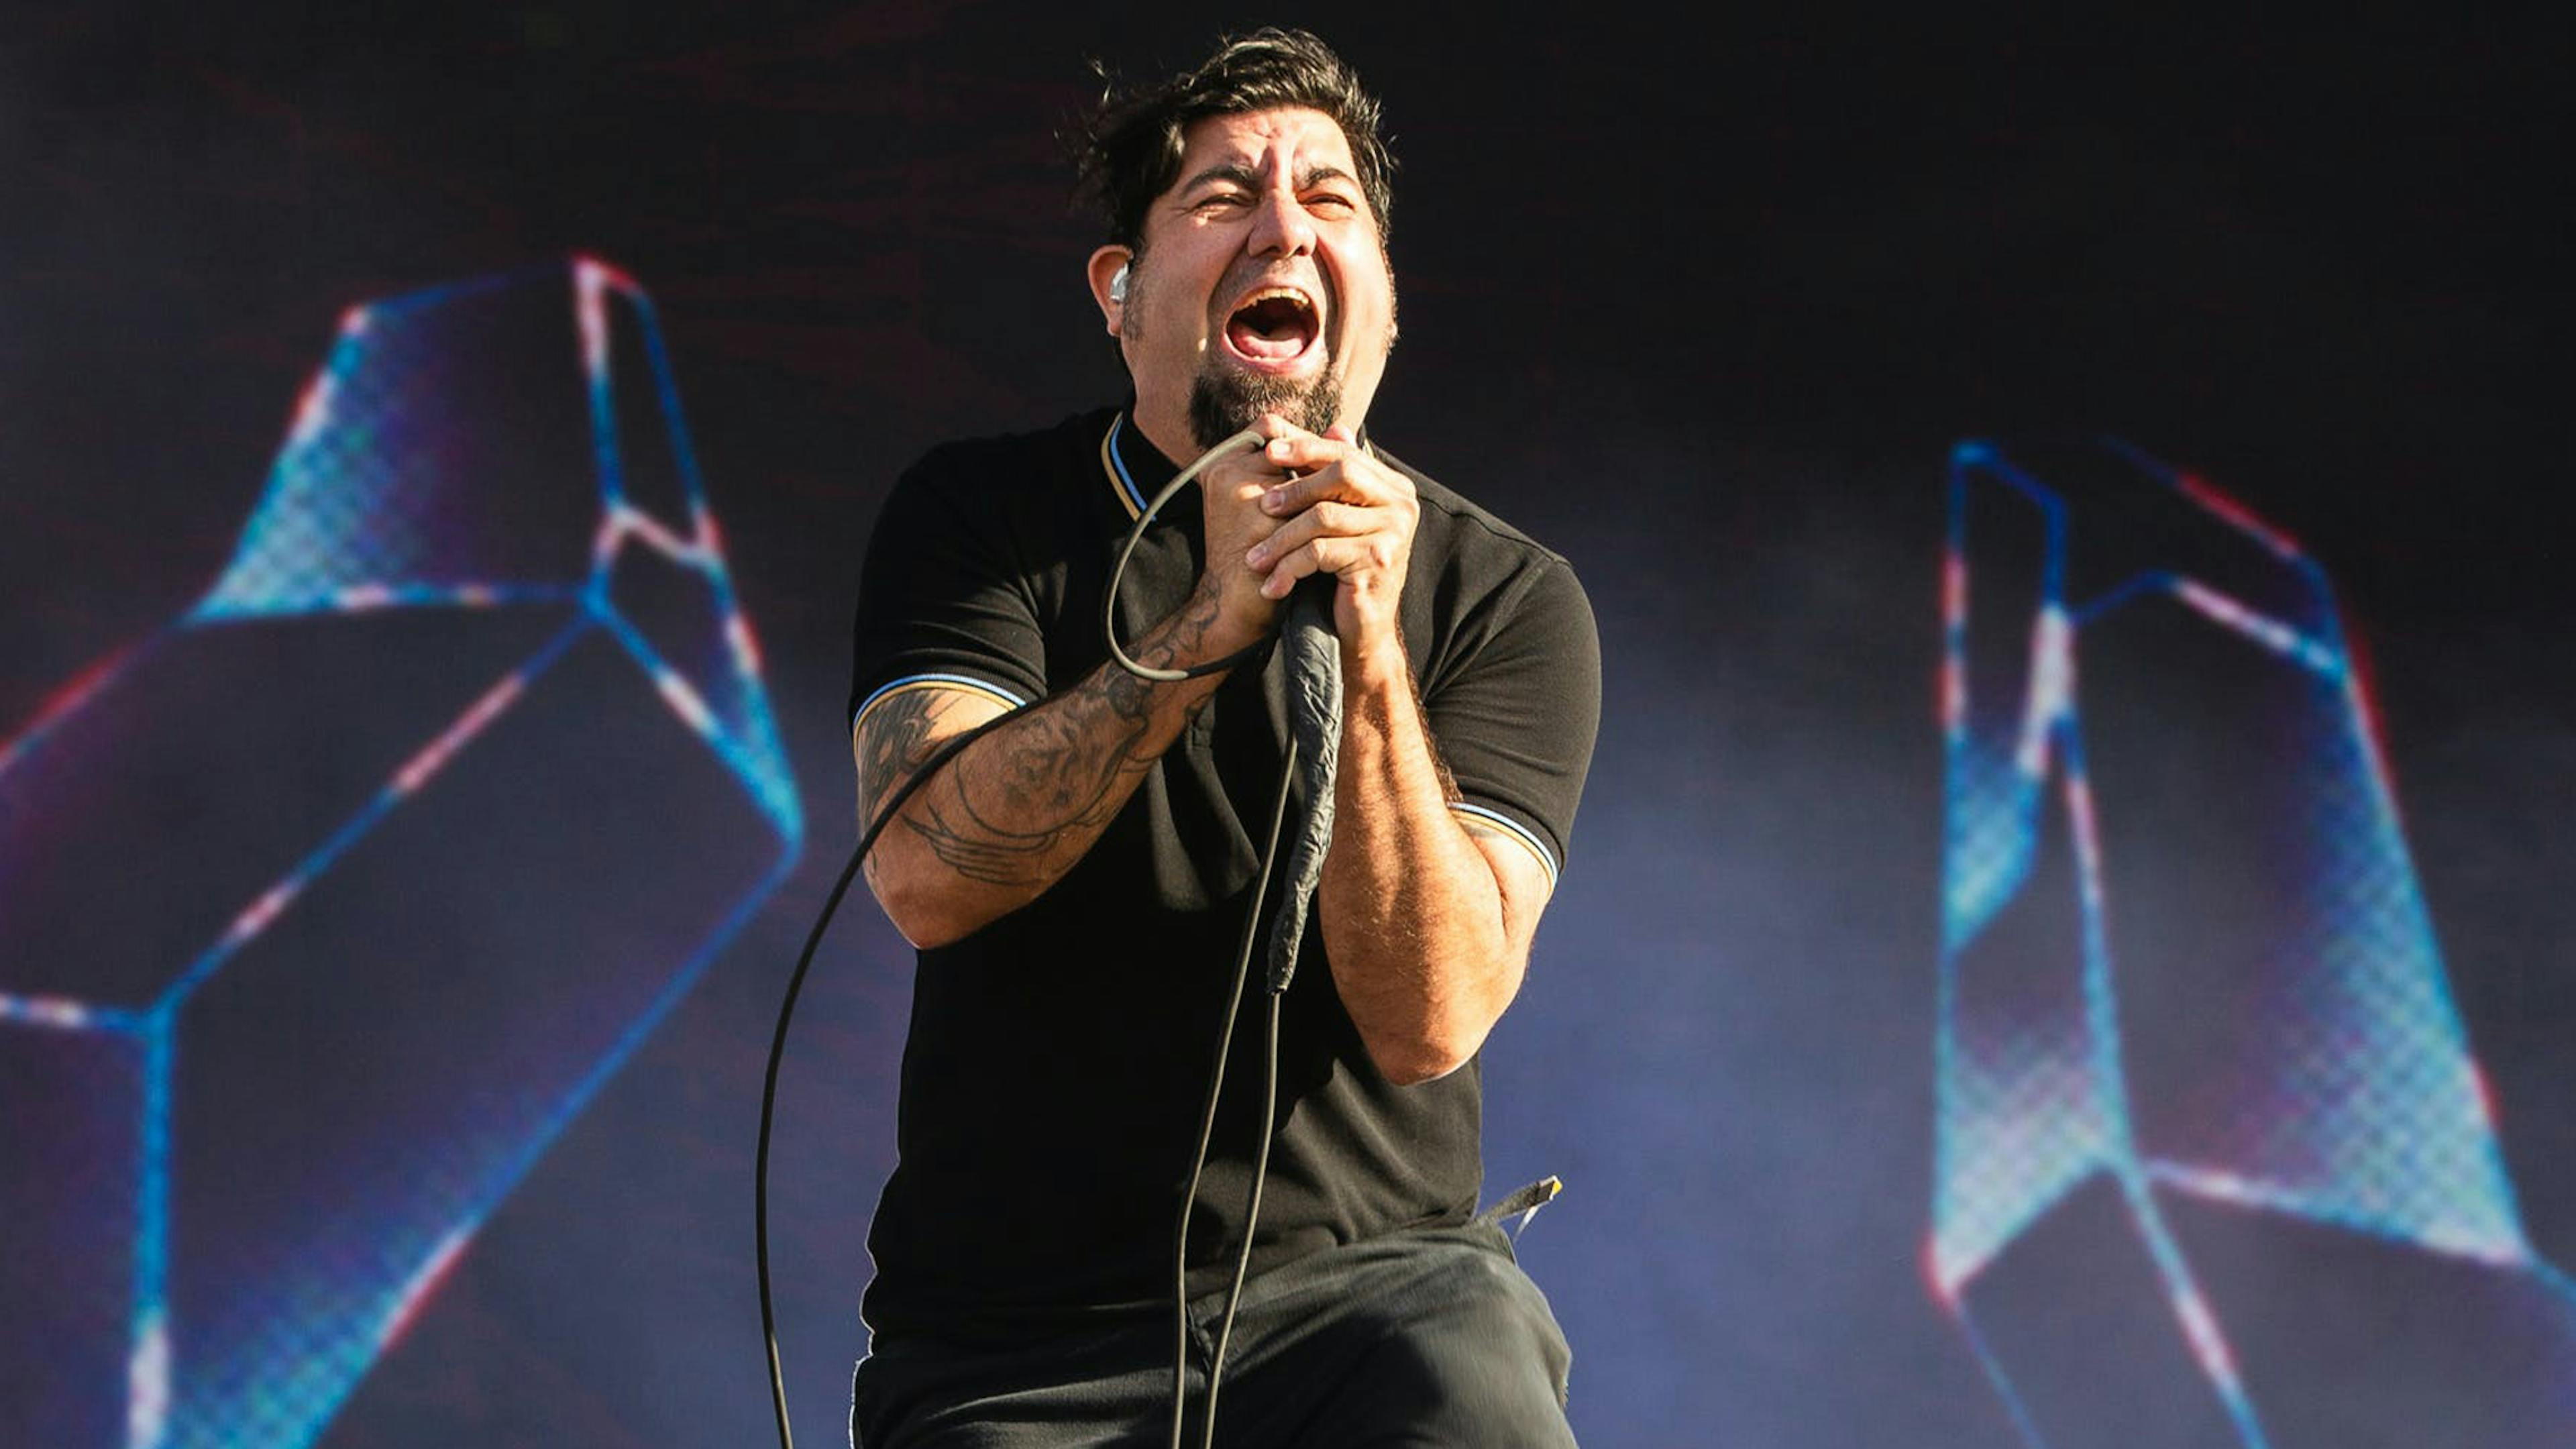 It looks like Chino Moreno is recording vocals for the new Deftones album